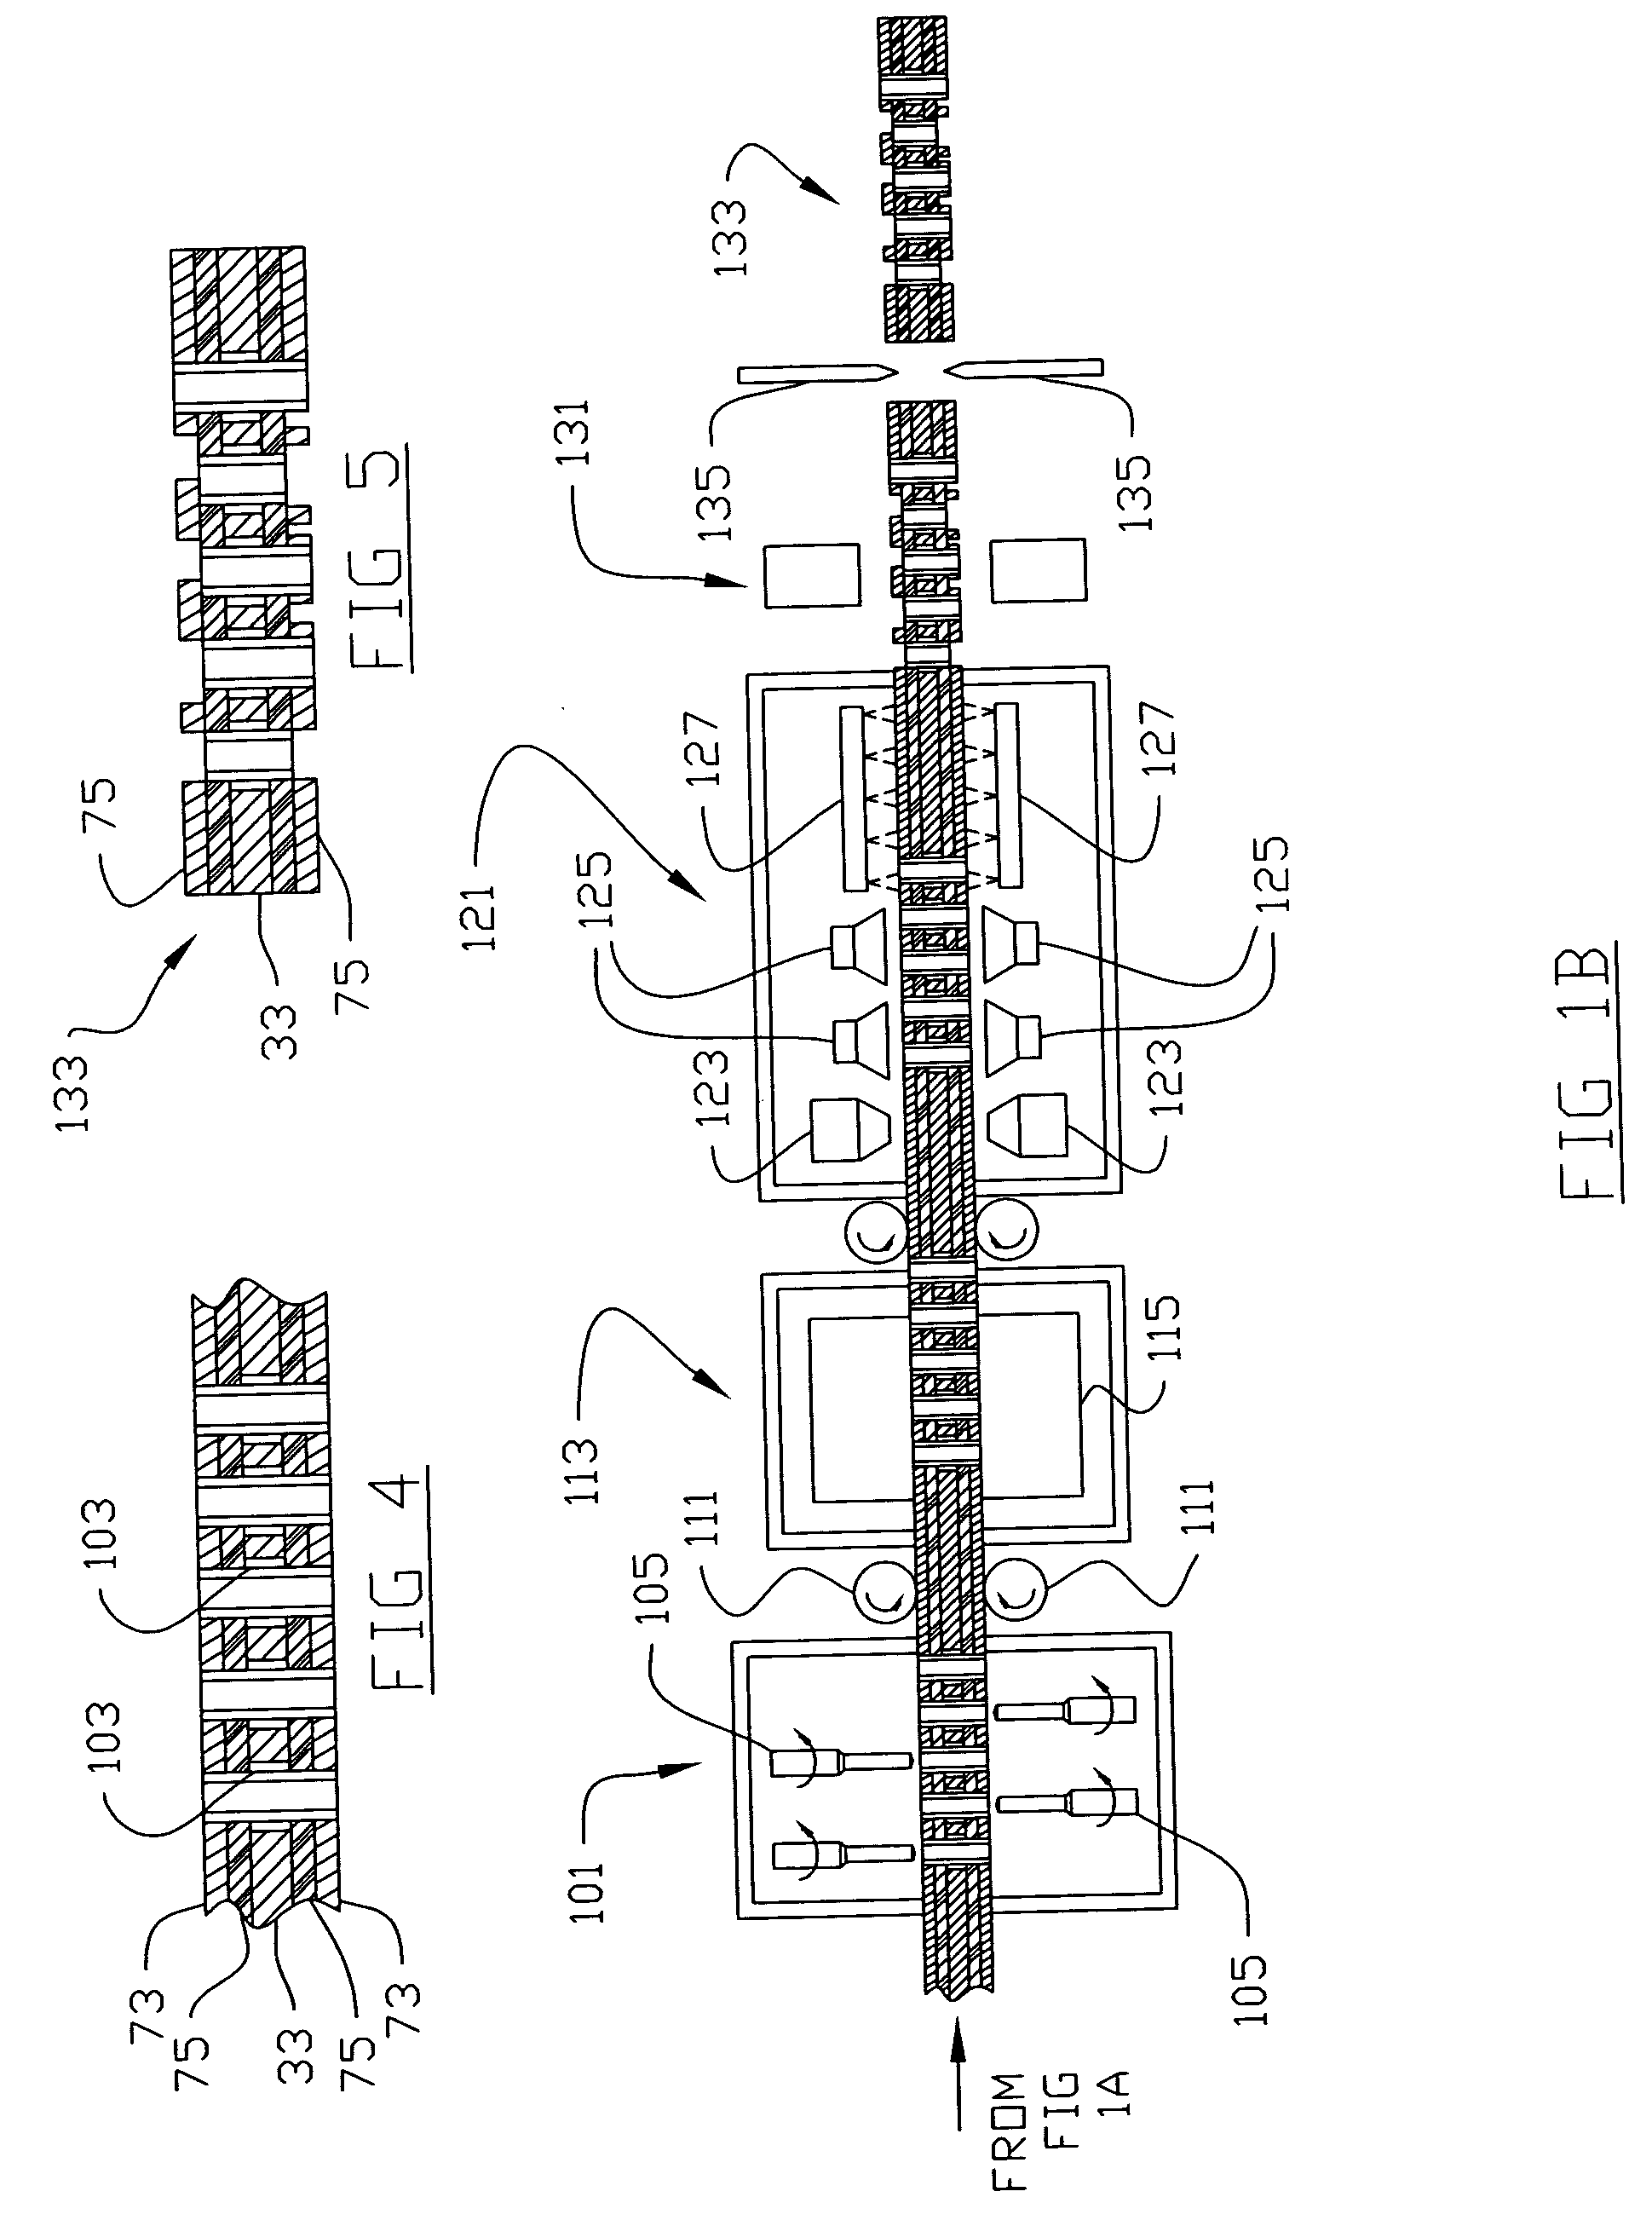 Apparatus and method for making circuitized substrates in a continuous manner